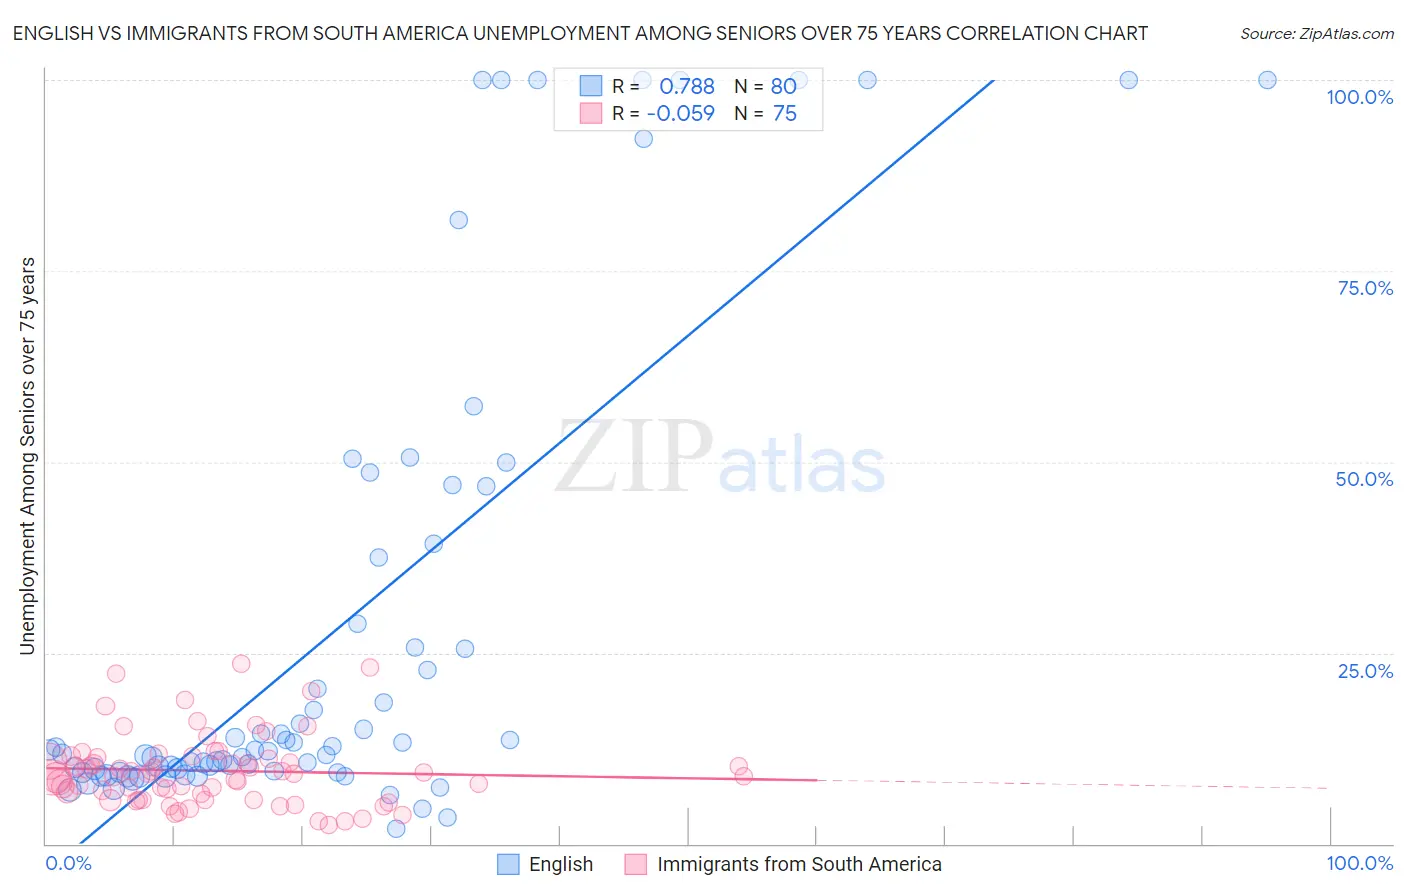 English vs Immigrants from South America Unemployment Among Seniors over 75 years